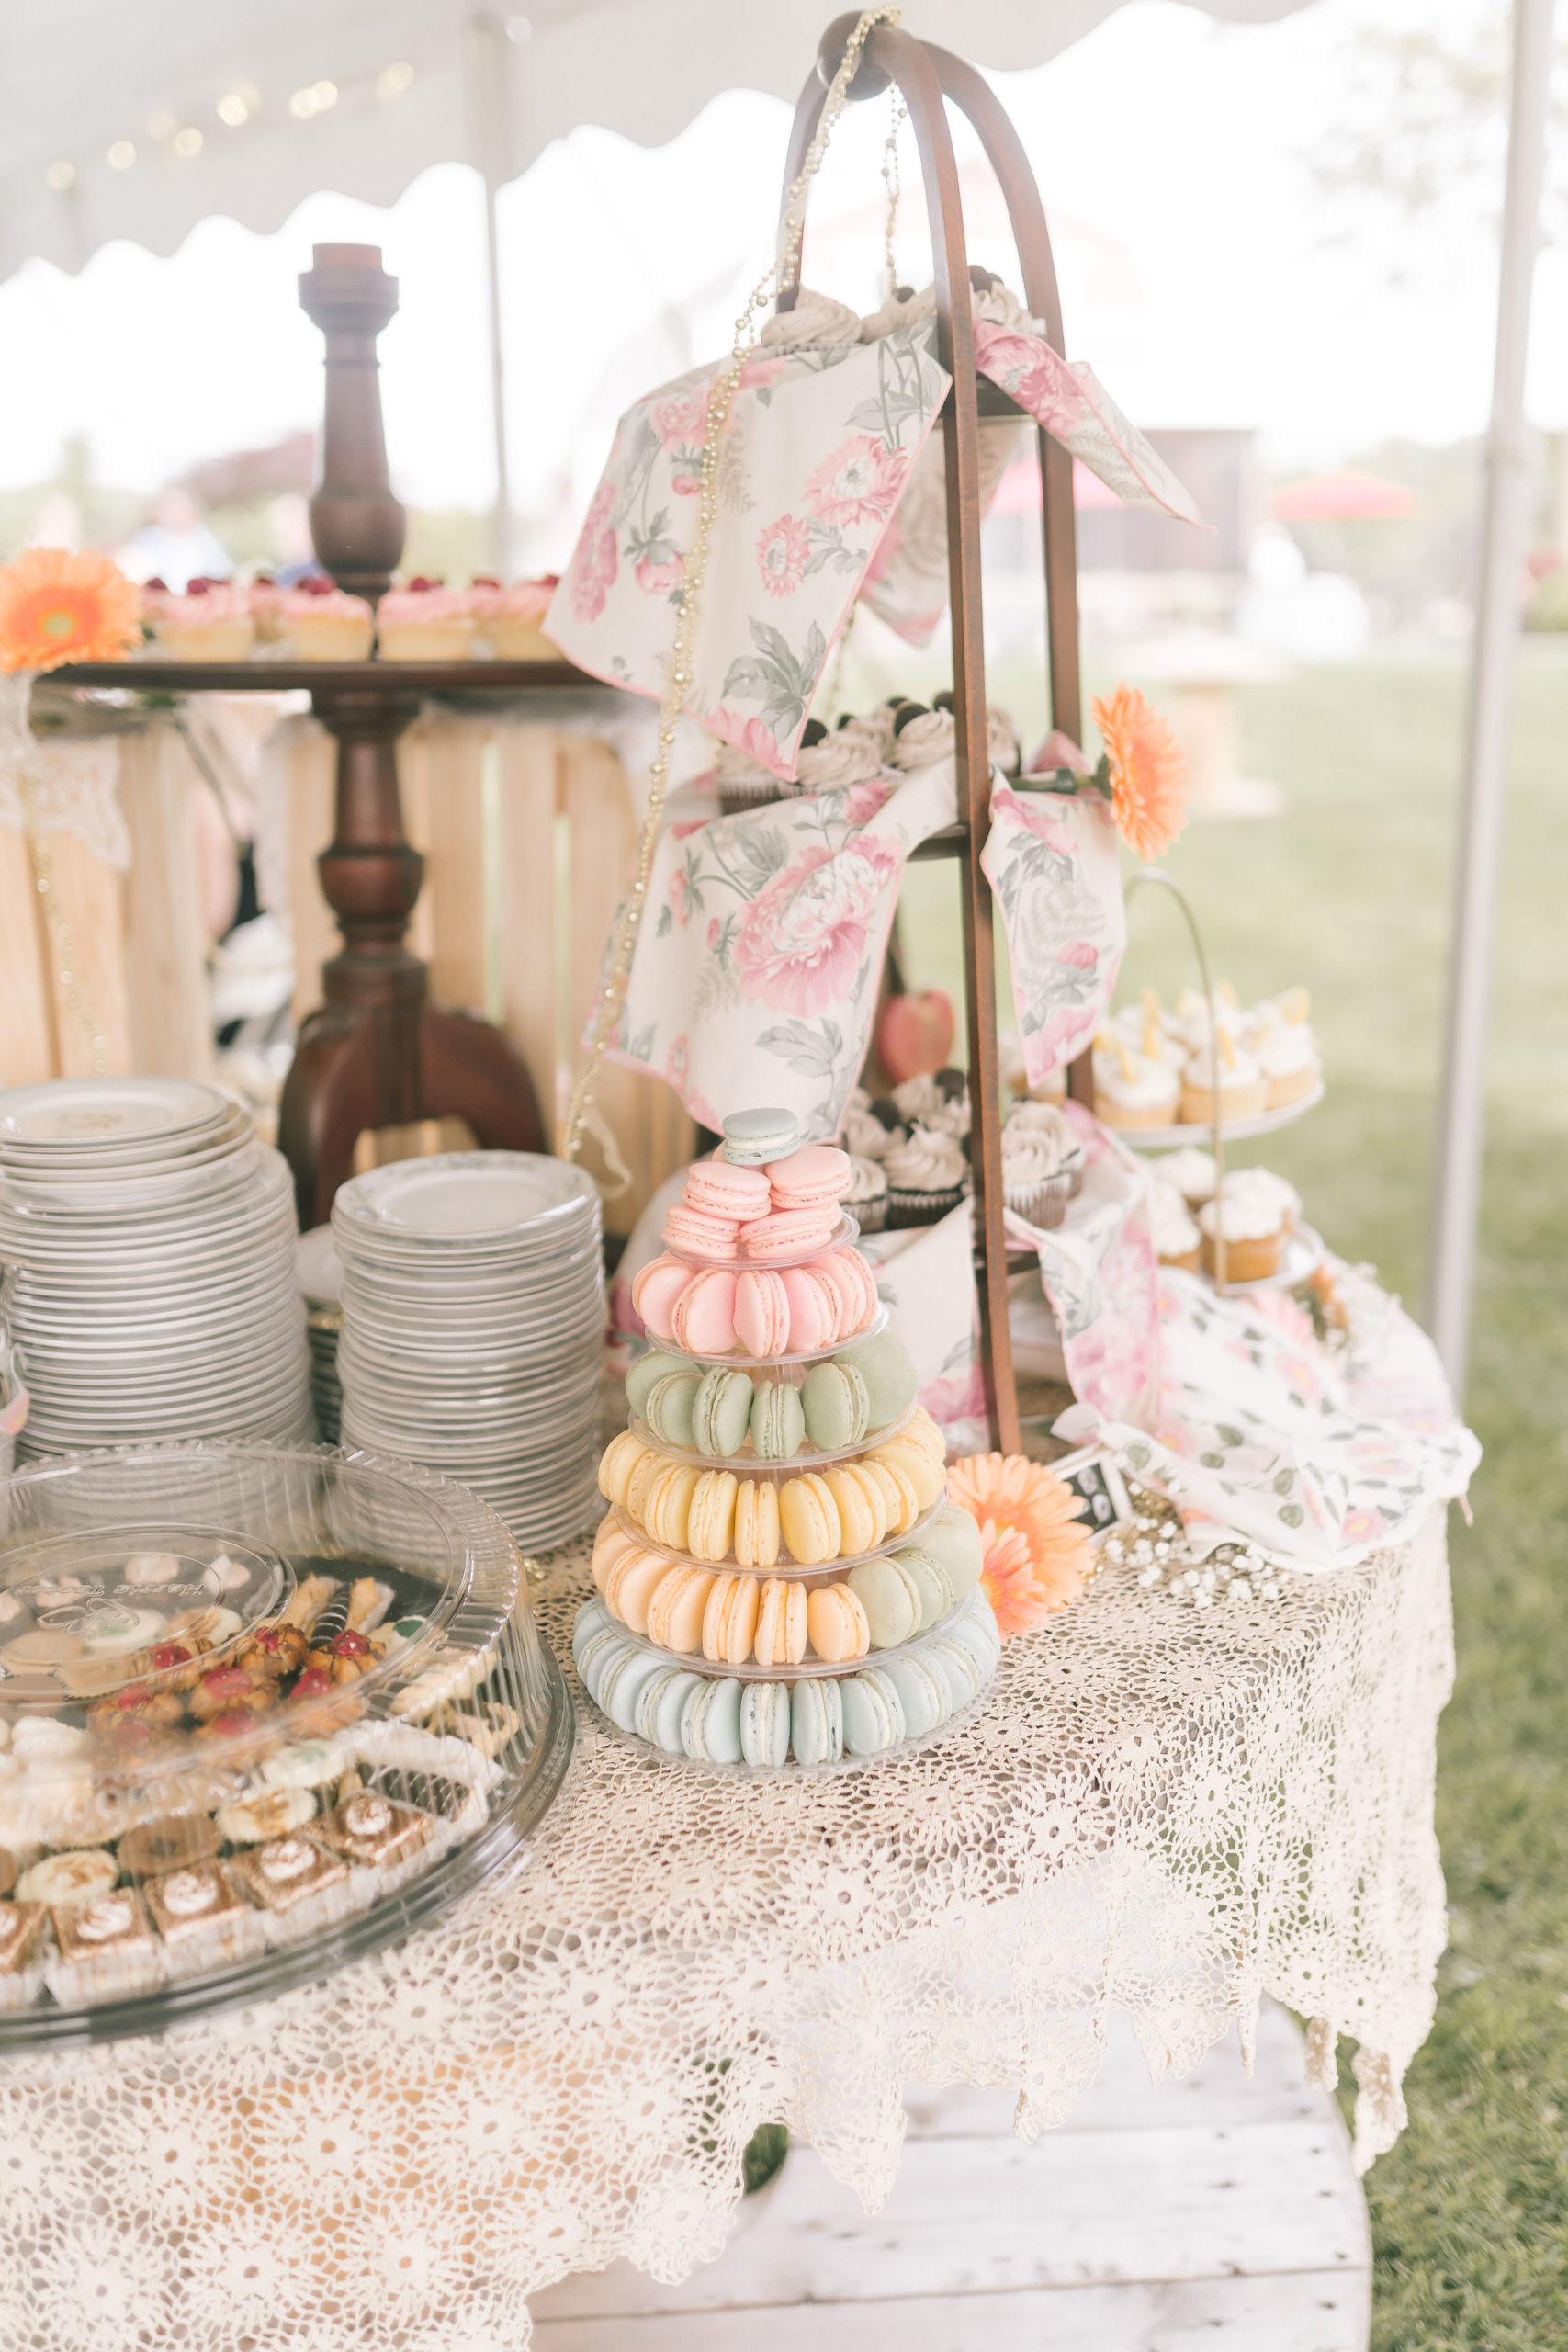 elegant and whimsical dessert table at a Maryland destination wedding with pastel colors and delightful sweets